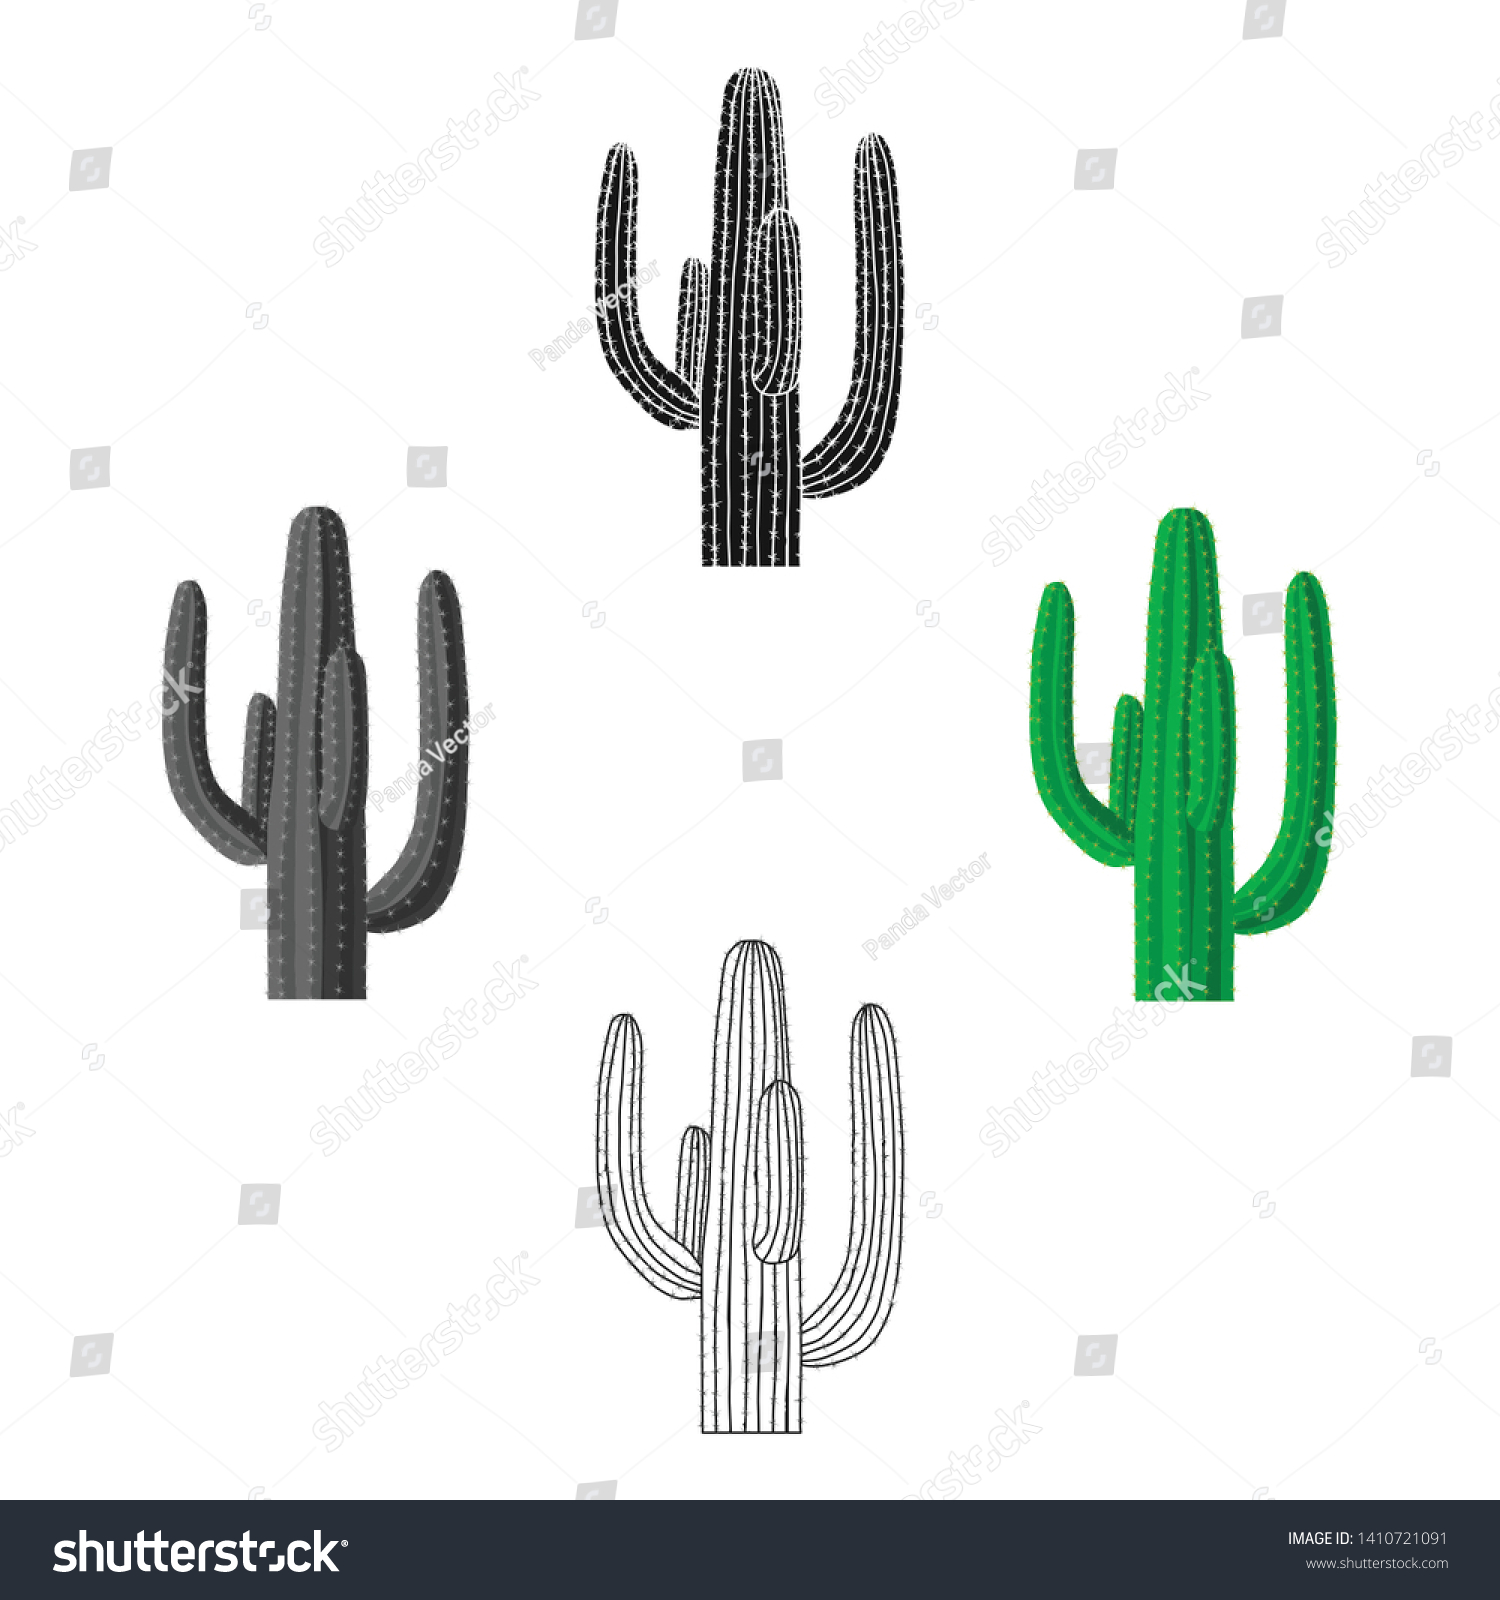 SVG of Mexican cactus icon in cartoon,black style isolated on white background. Mexico country symbol stock vector illustration. svg